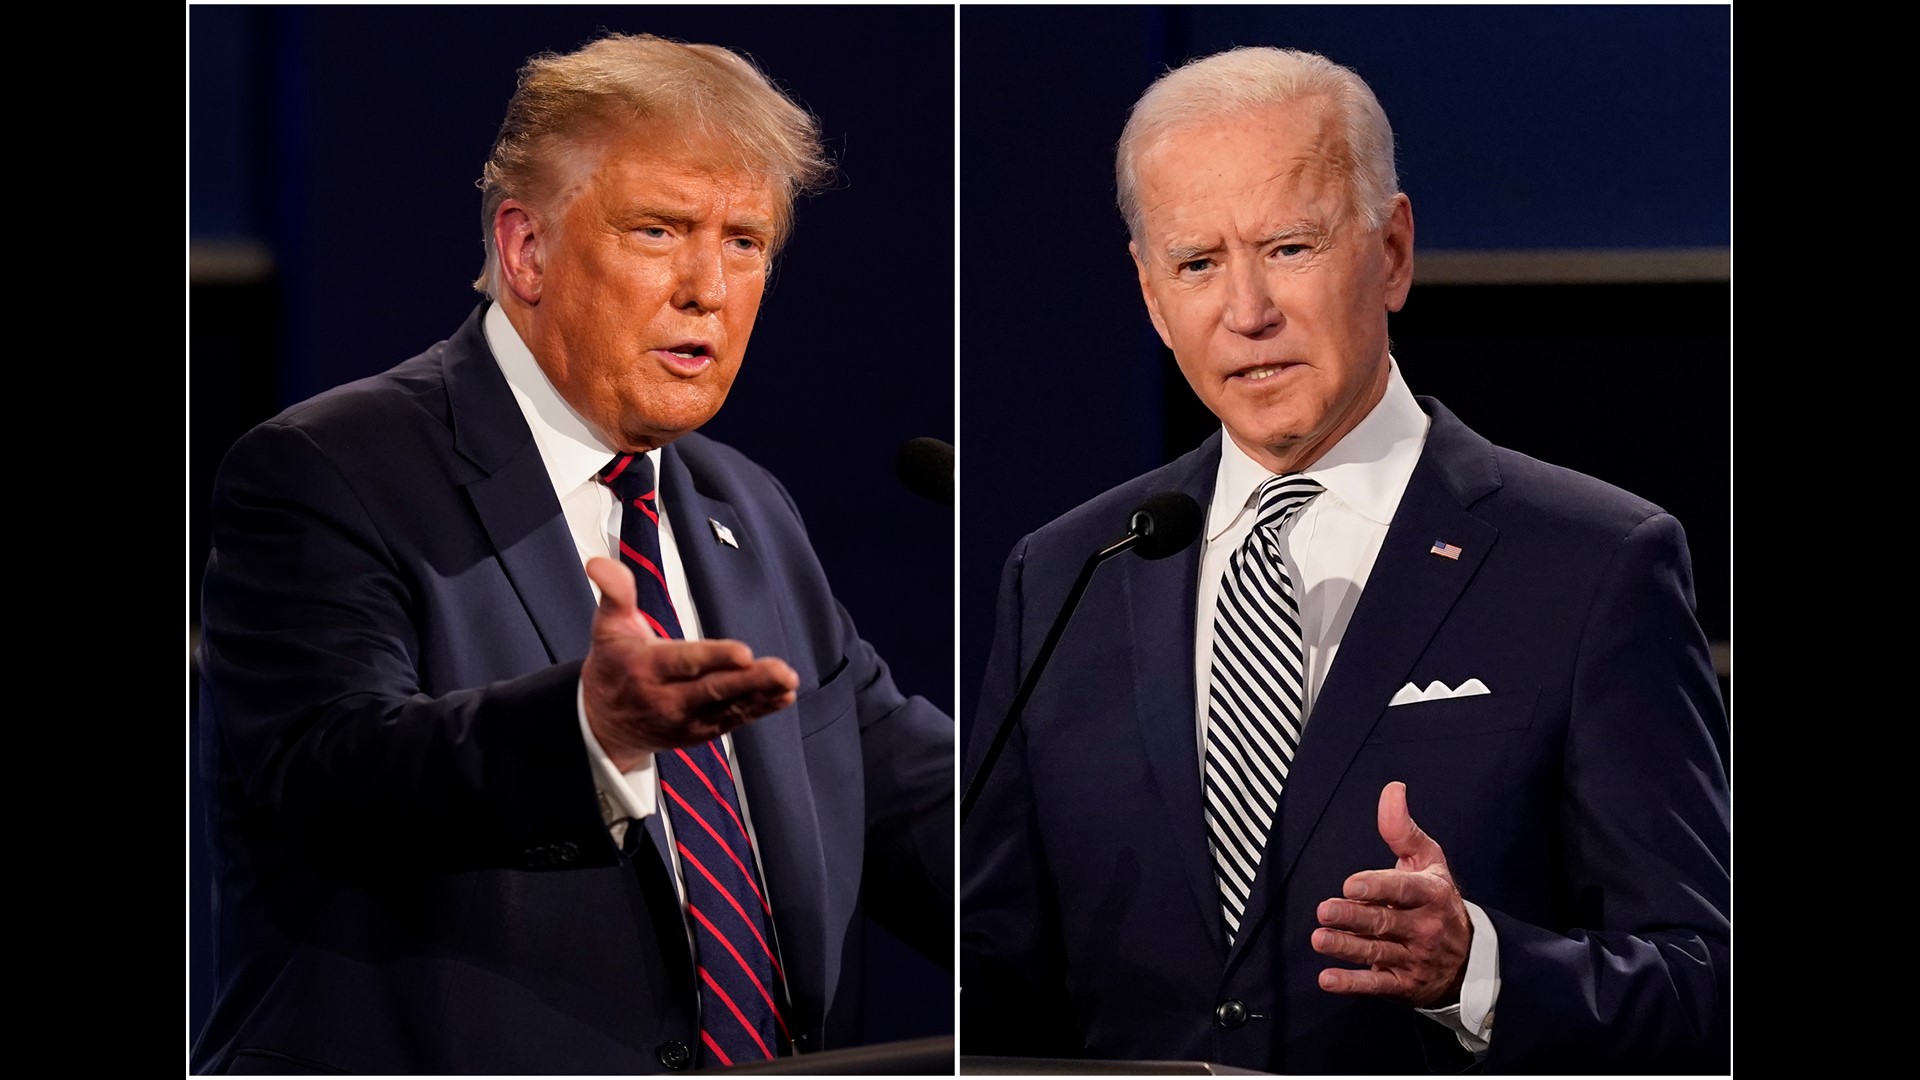 President Trump won the majority in more counties, but President-elect Biden won many of the 'economically significant' ones, Brookings Institution report says.